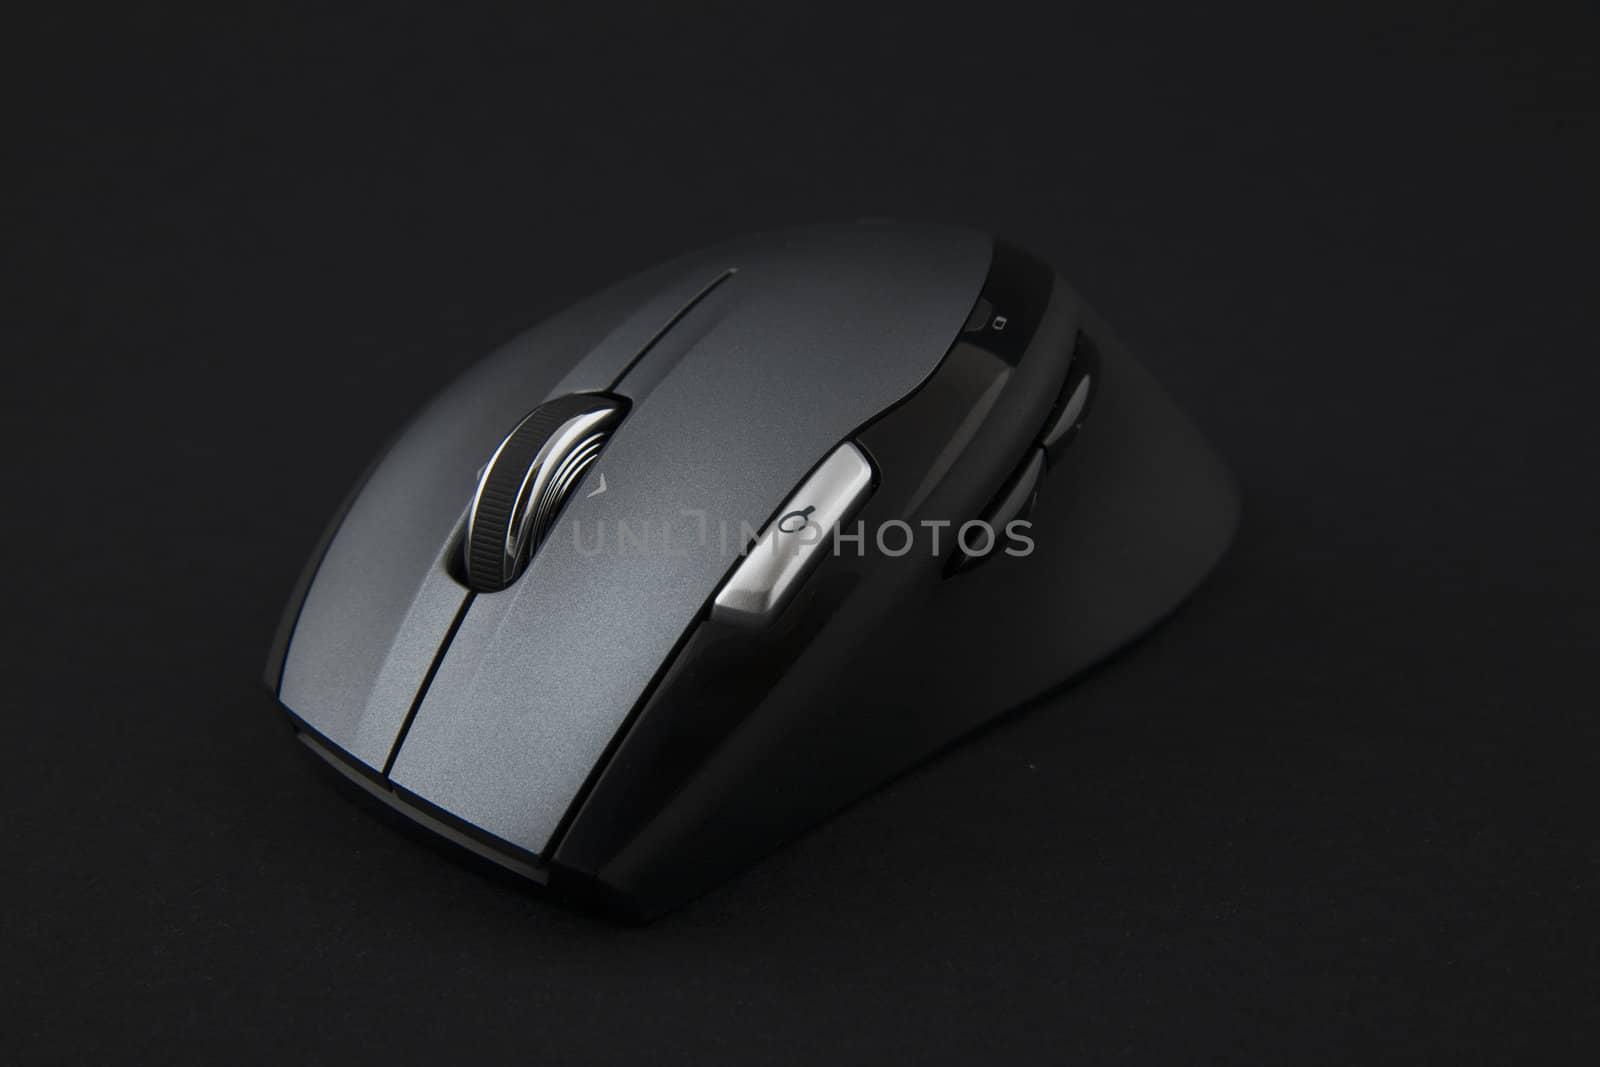 cordless computer mouse on very dark background